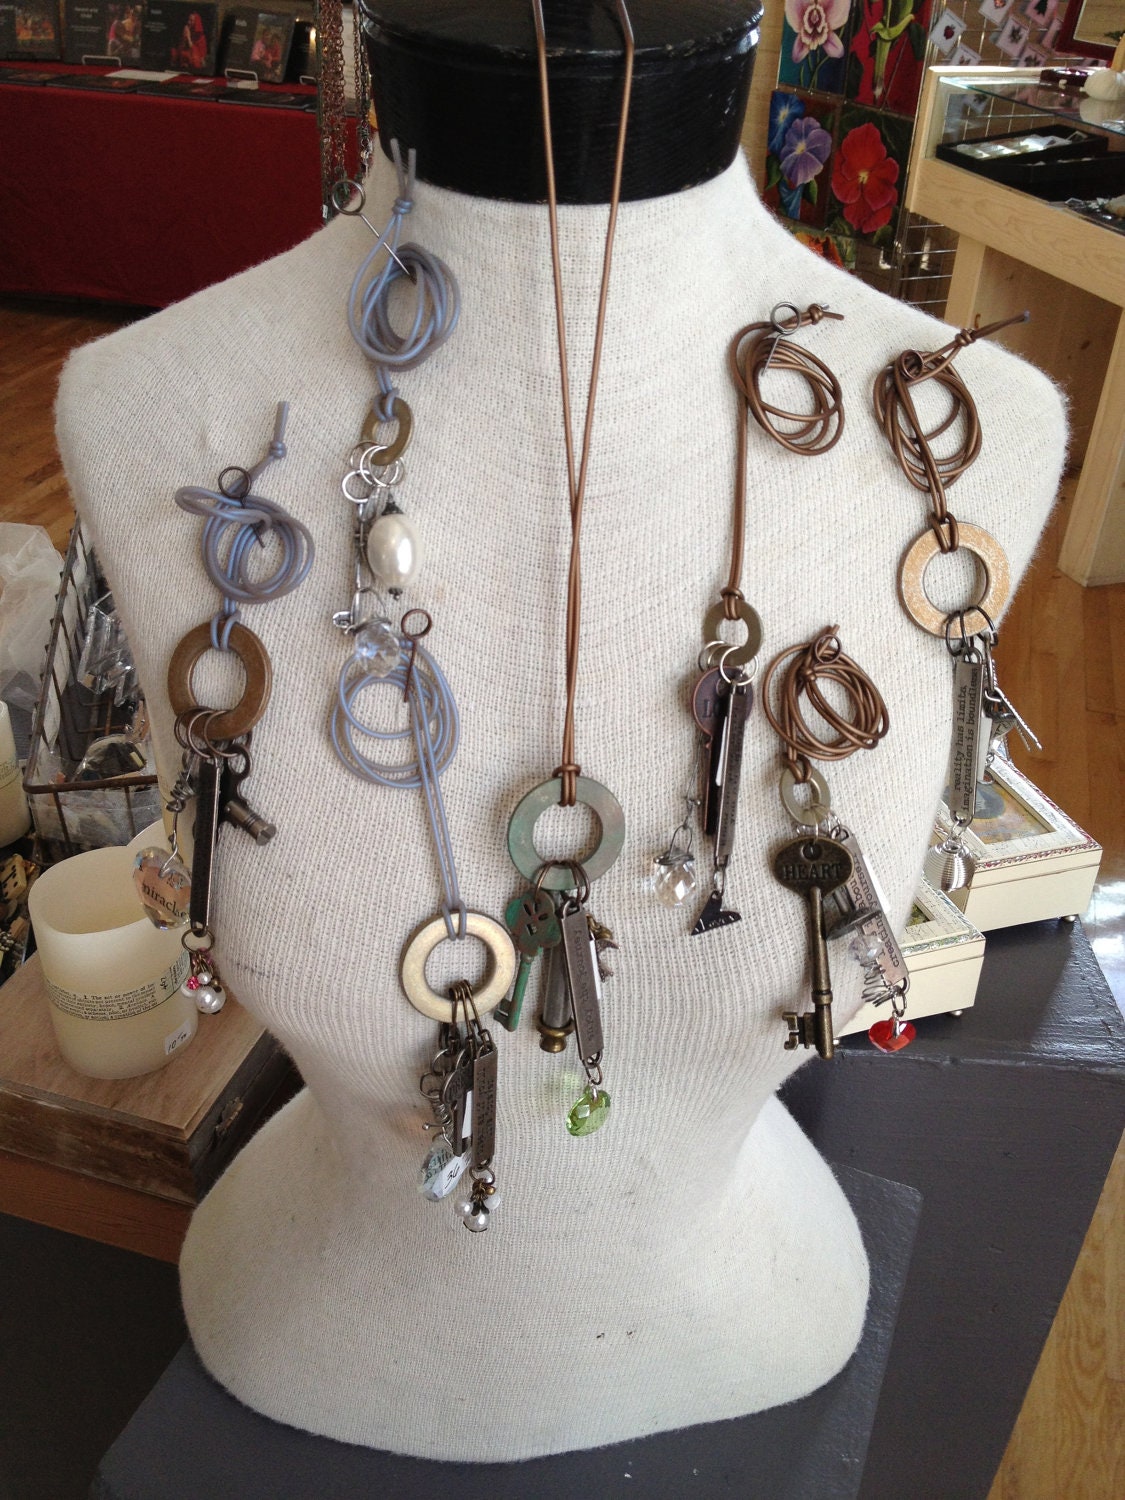 Found Object Jewelry on Chord every necklace is by TerryMuldoonArt